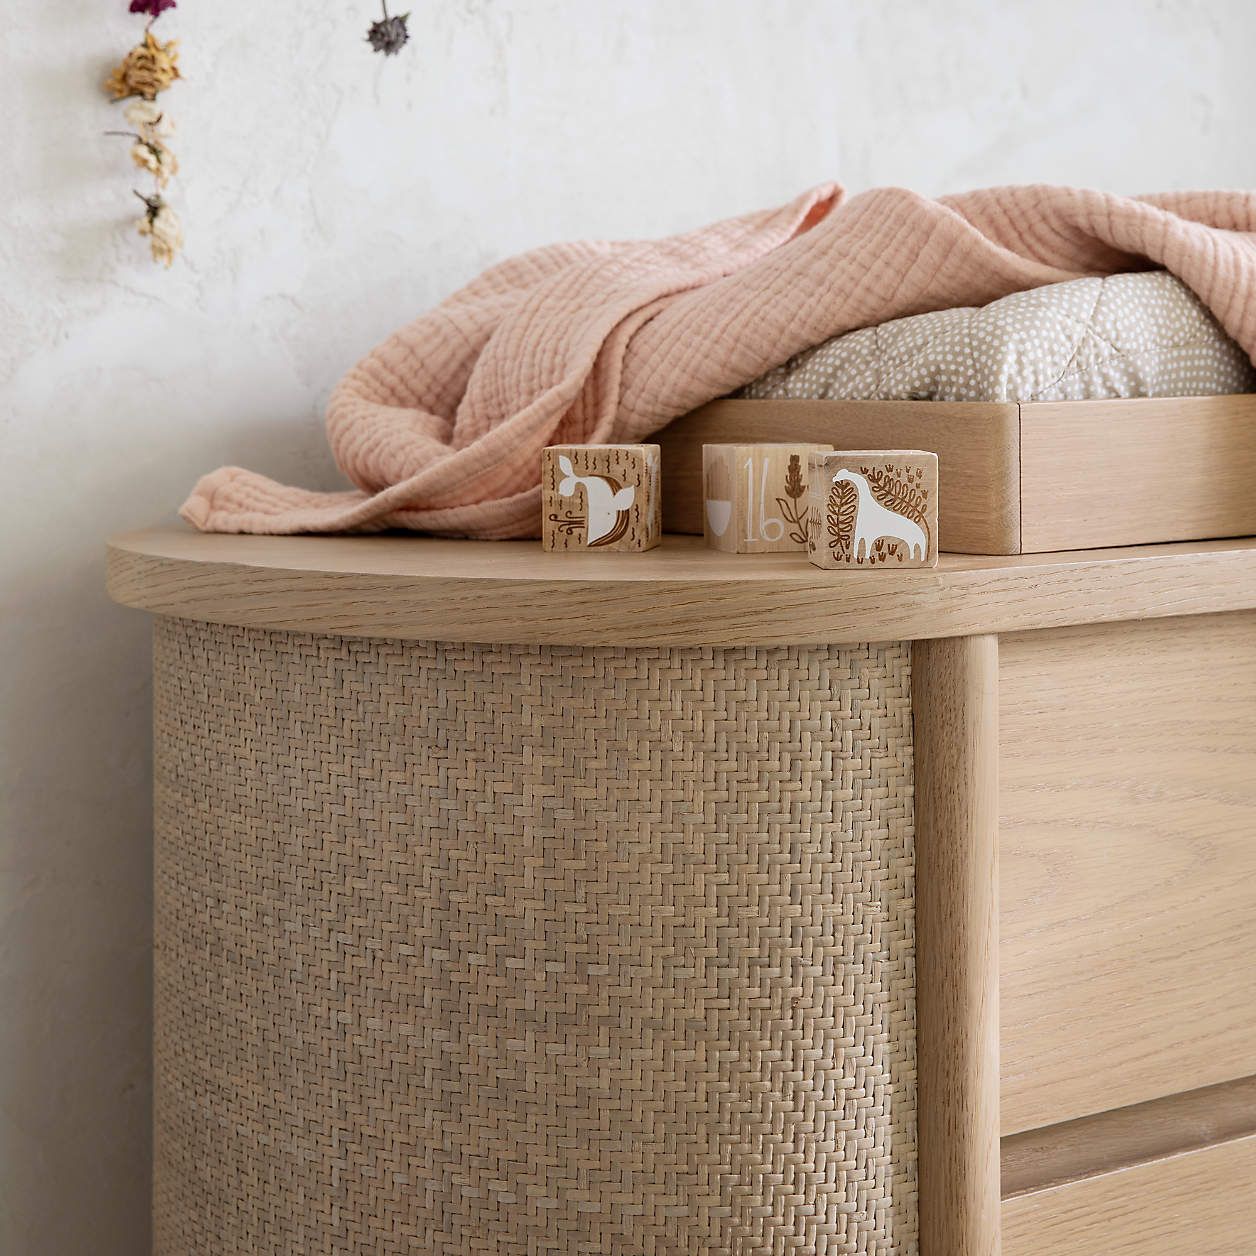 Transform Your Dresser into a Stylish and Functional Changing Table with a Changing Table Topper